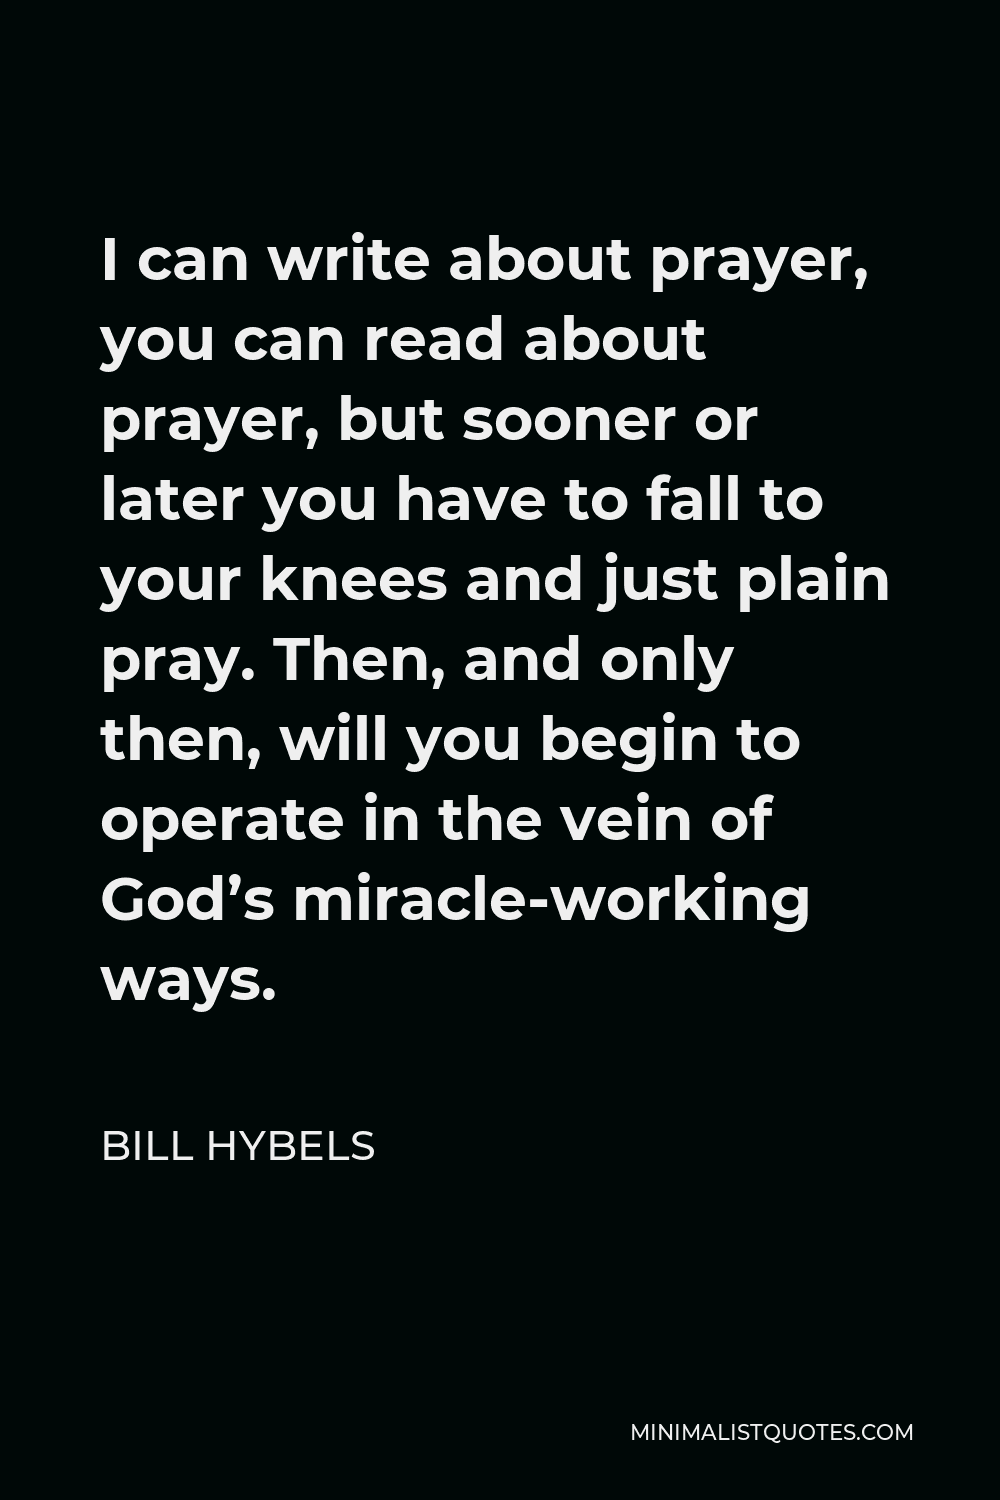 Bill Hybels Quote - I can write about prayer, you can read about prayer, but sooner or later you have to fall to your knees and just plain pray. Then, and only then, will you begin to operate in the vein of God’s miracle-working ways.